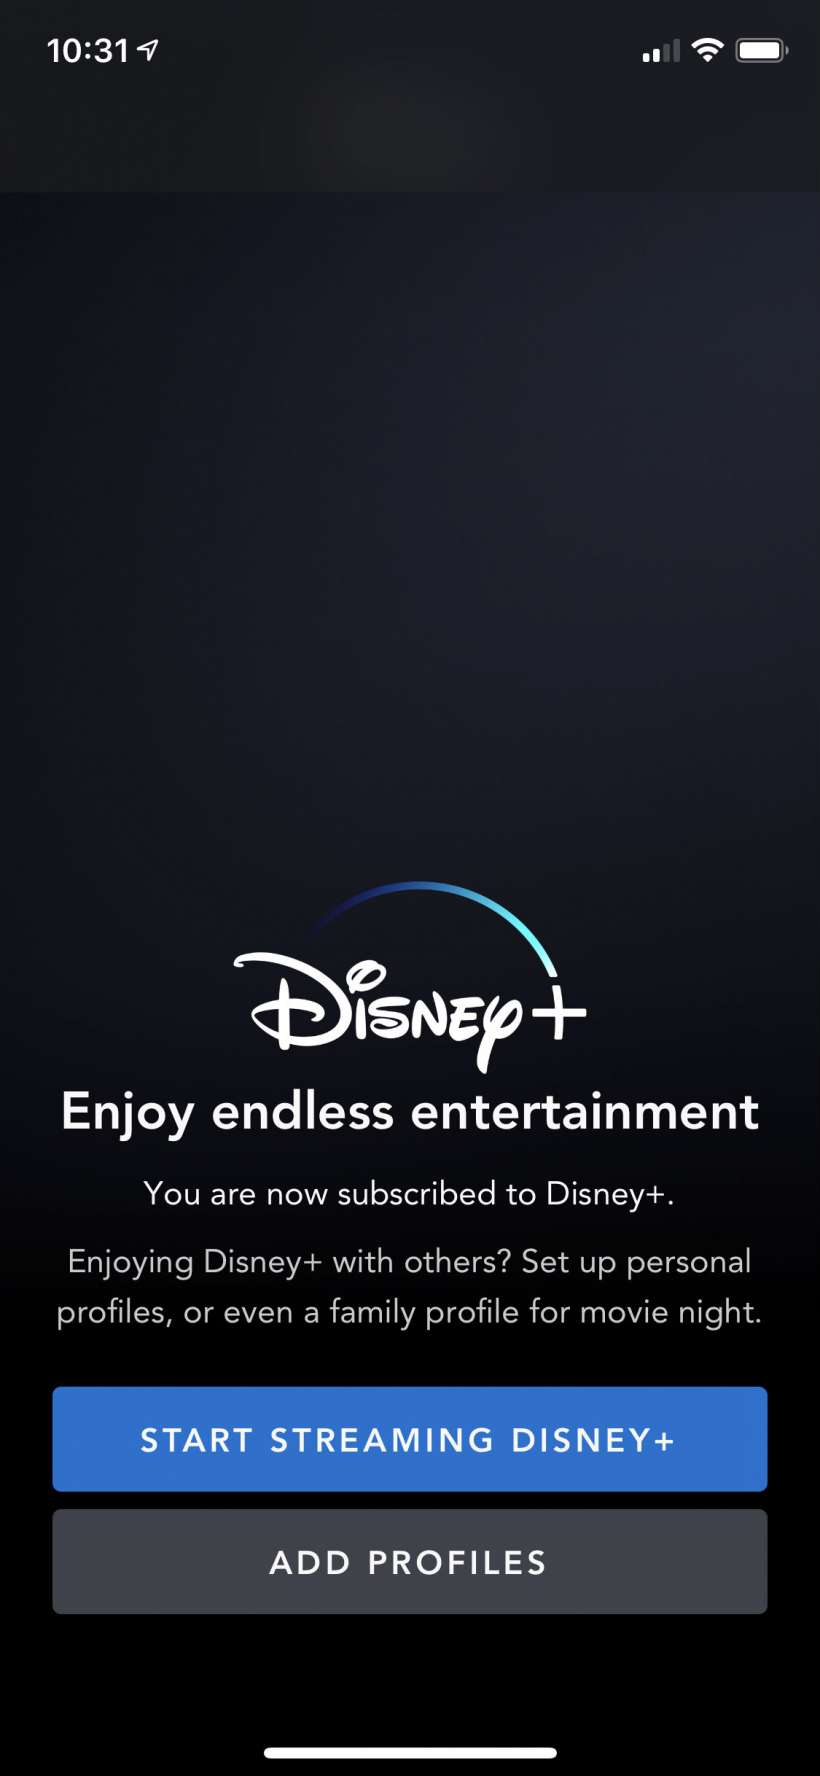 How to start your free one week trial period of Disney+ on iPhone and iPad.